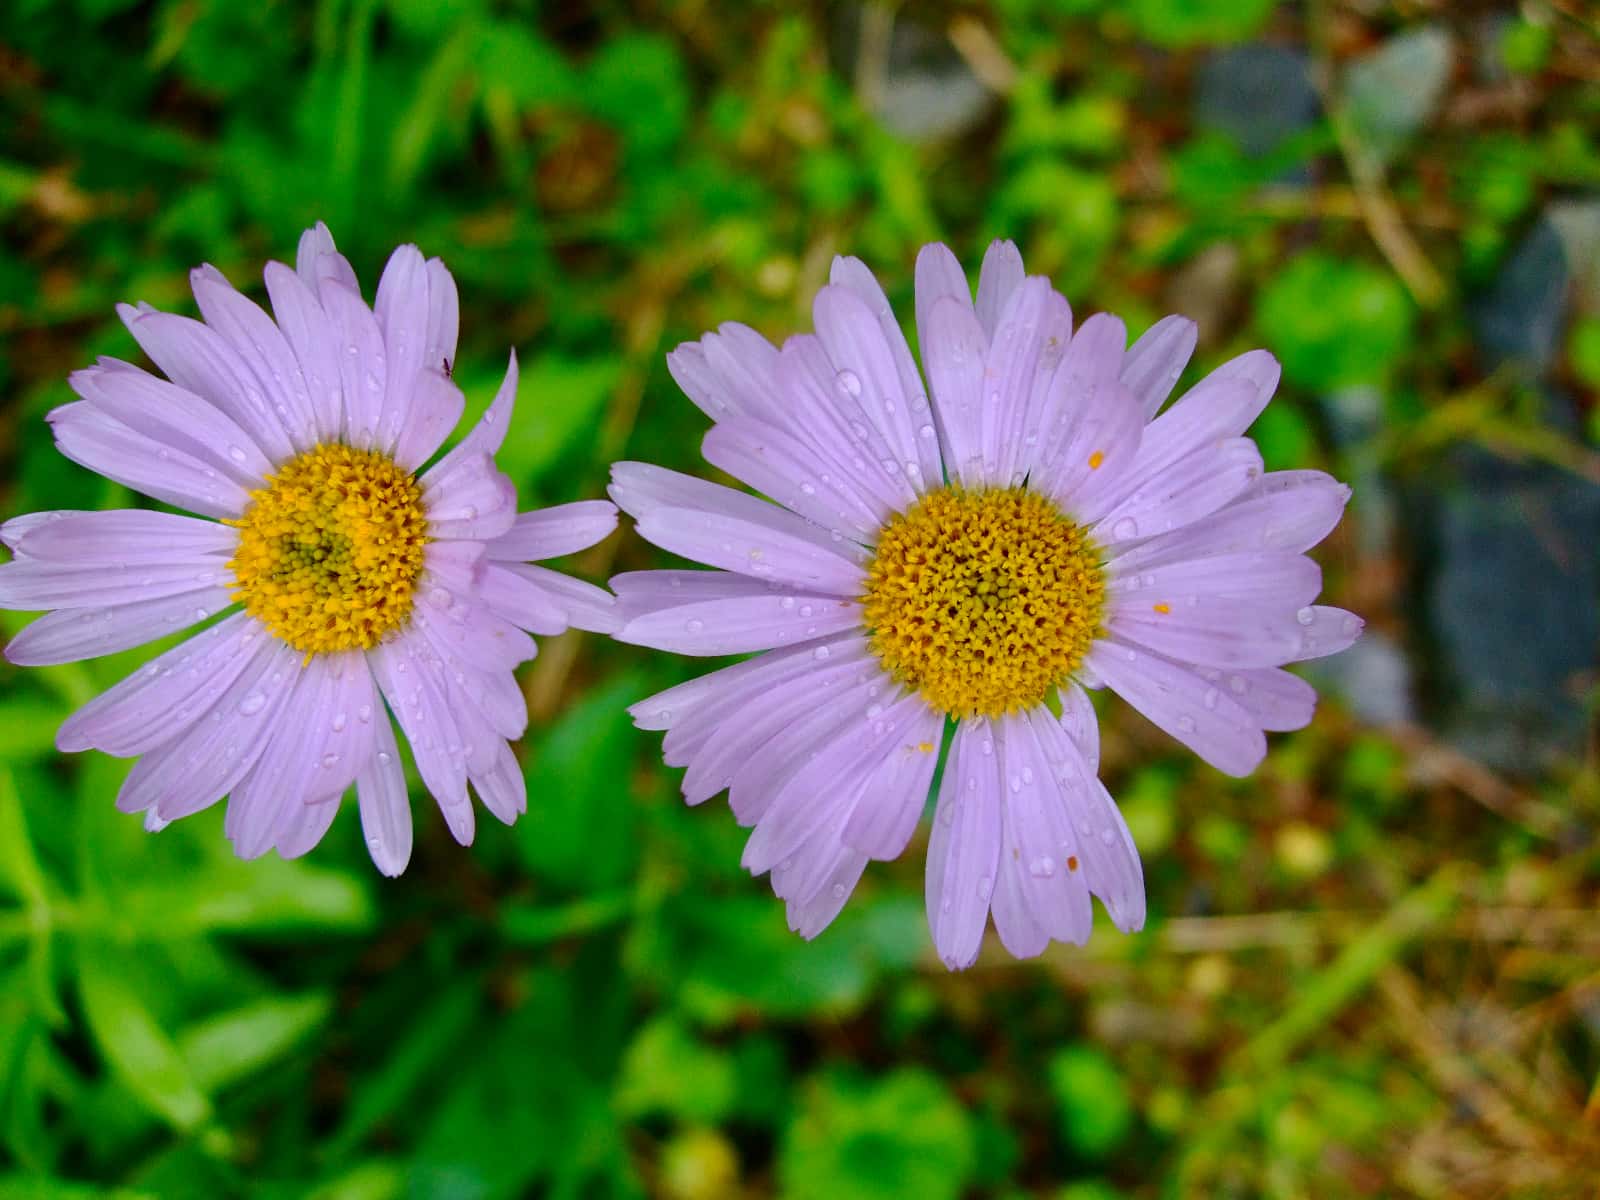 Close up of two purple and yellow flowers